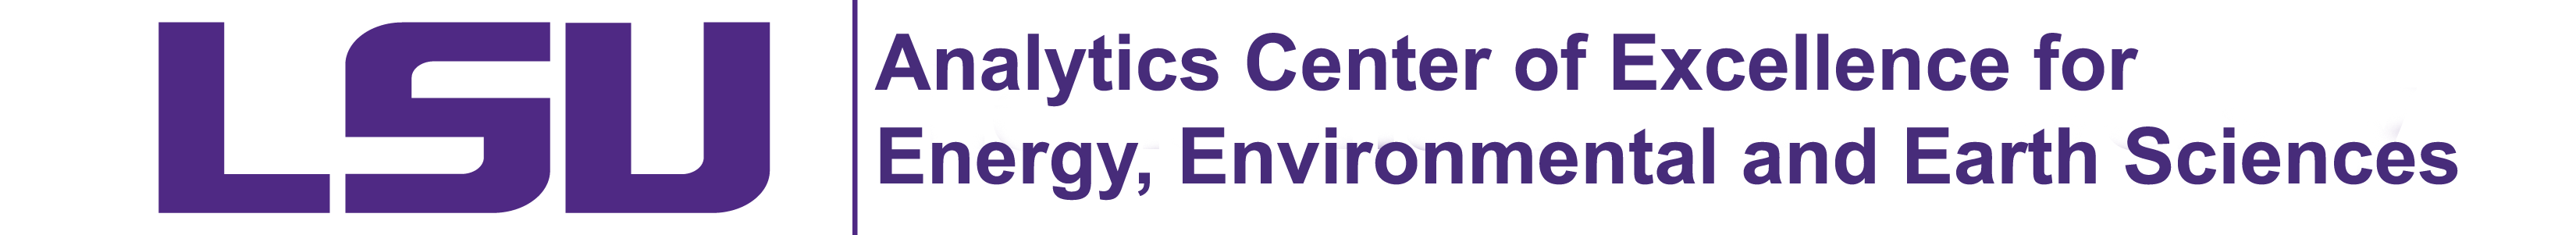 Analytics Center of Excellence for Energy, Environmental and Earth Science